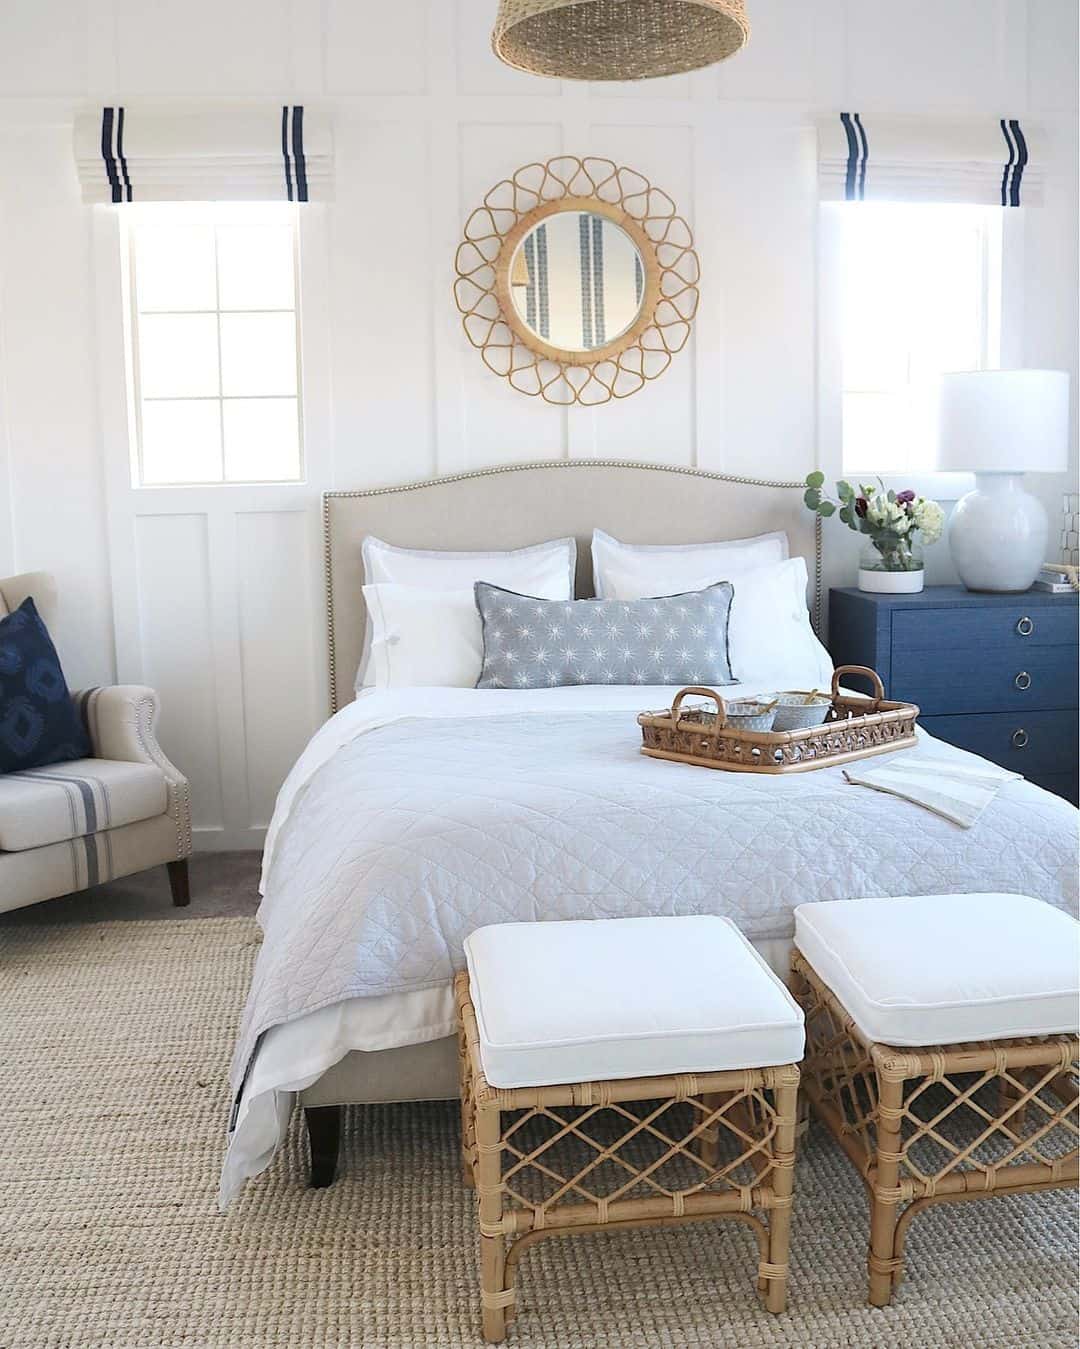 18 Mirror Above Bed Ideas to Jazz Up Your Bedroom